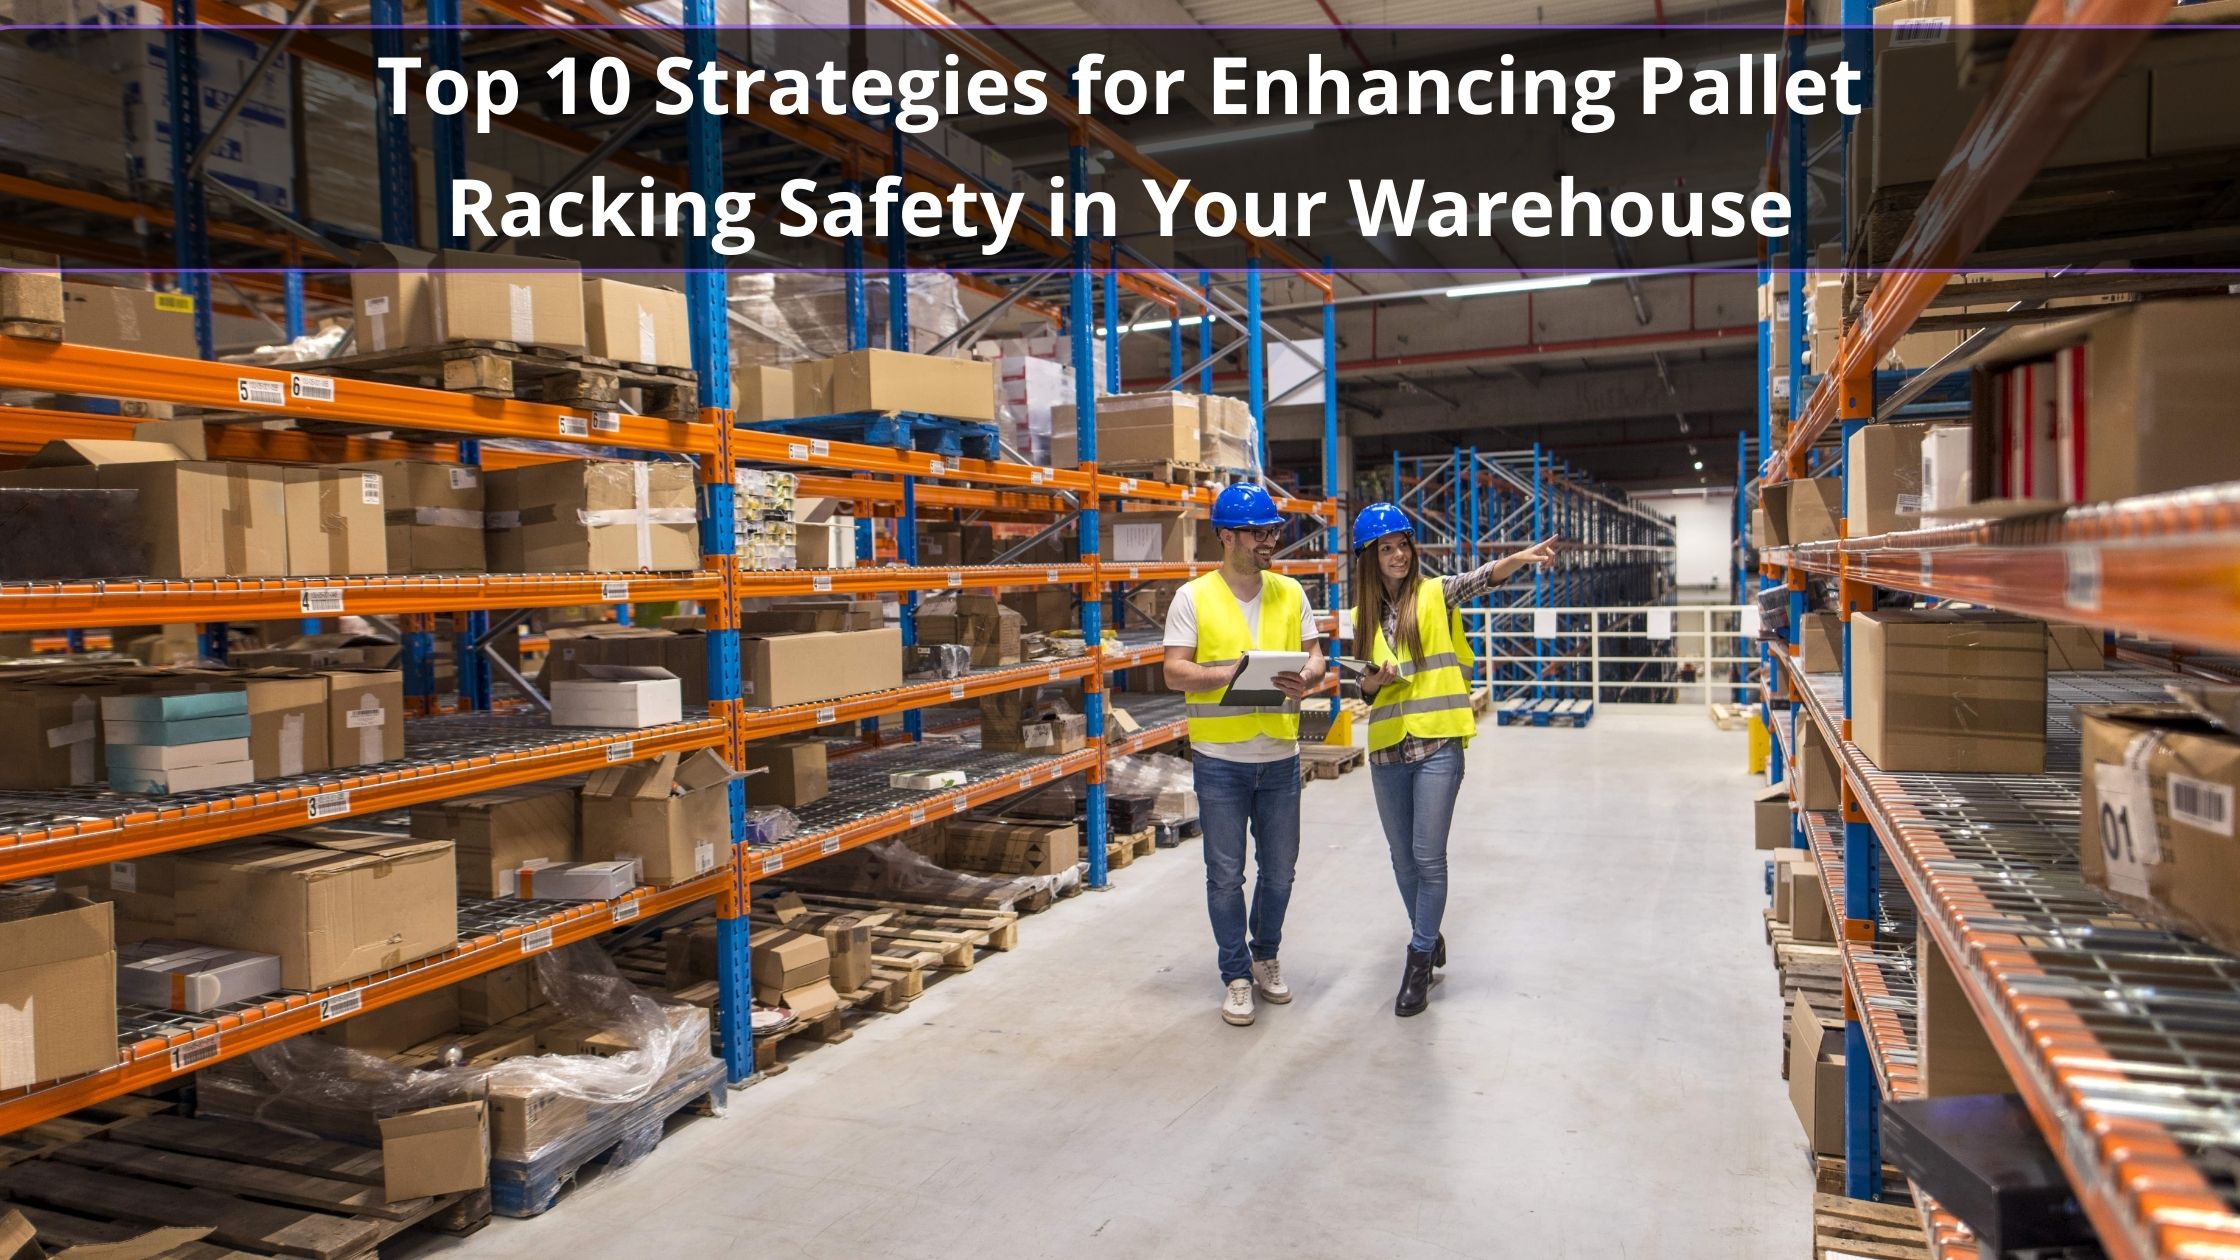 Top 10 Strategies for Enhancing Pallet Racking Safety in Your Warehouse